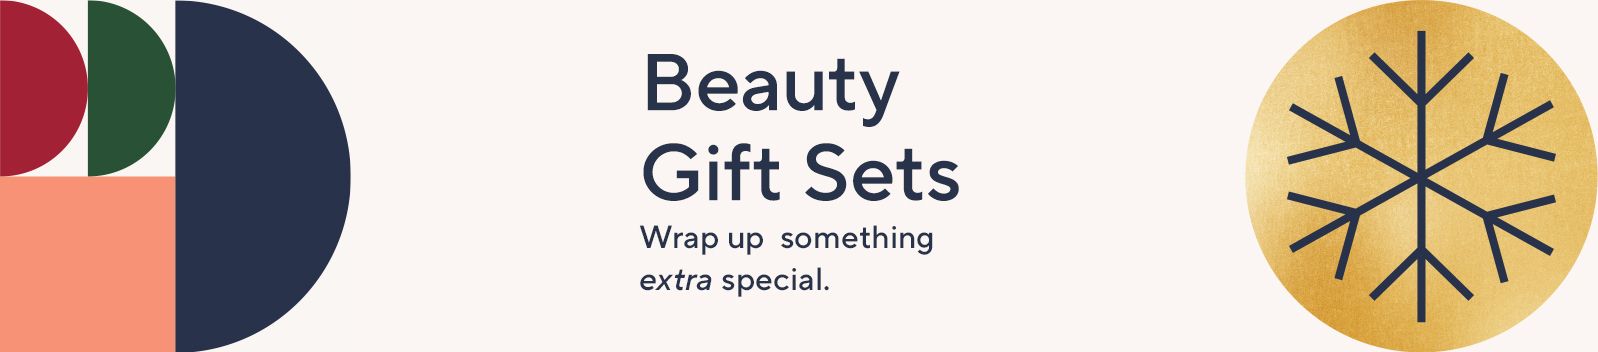 Beauty Gift Sets - Wrap up something extra special.